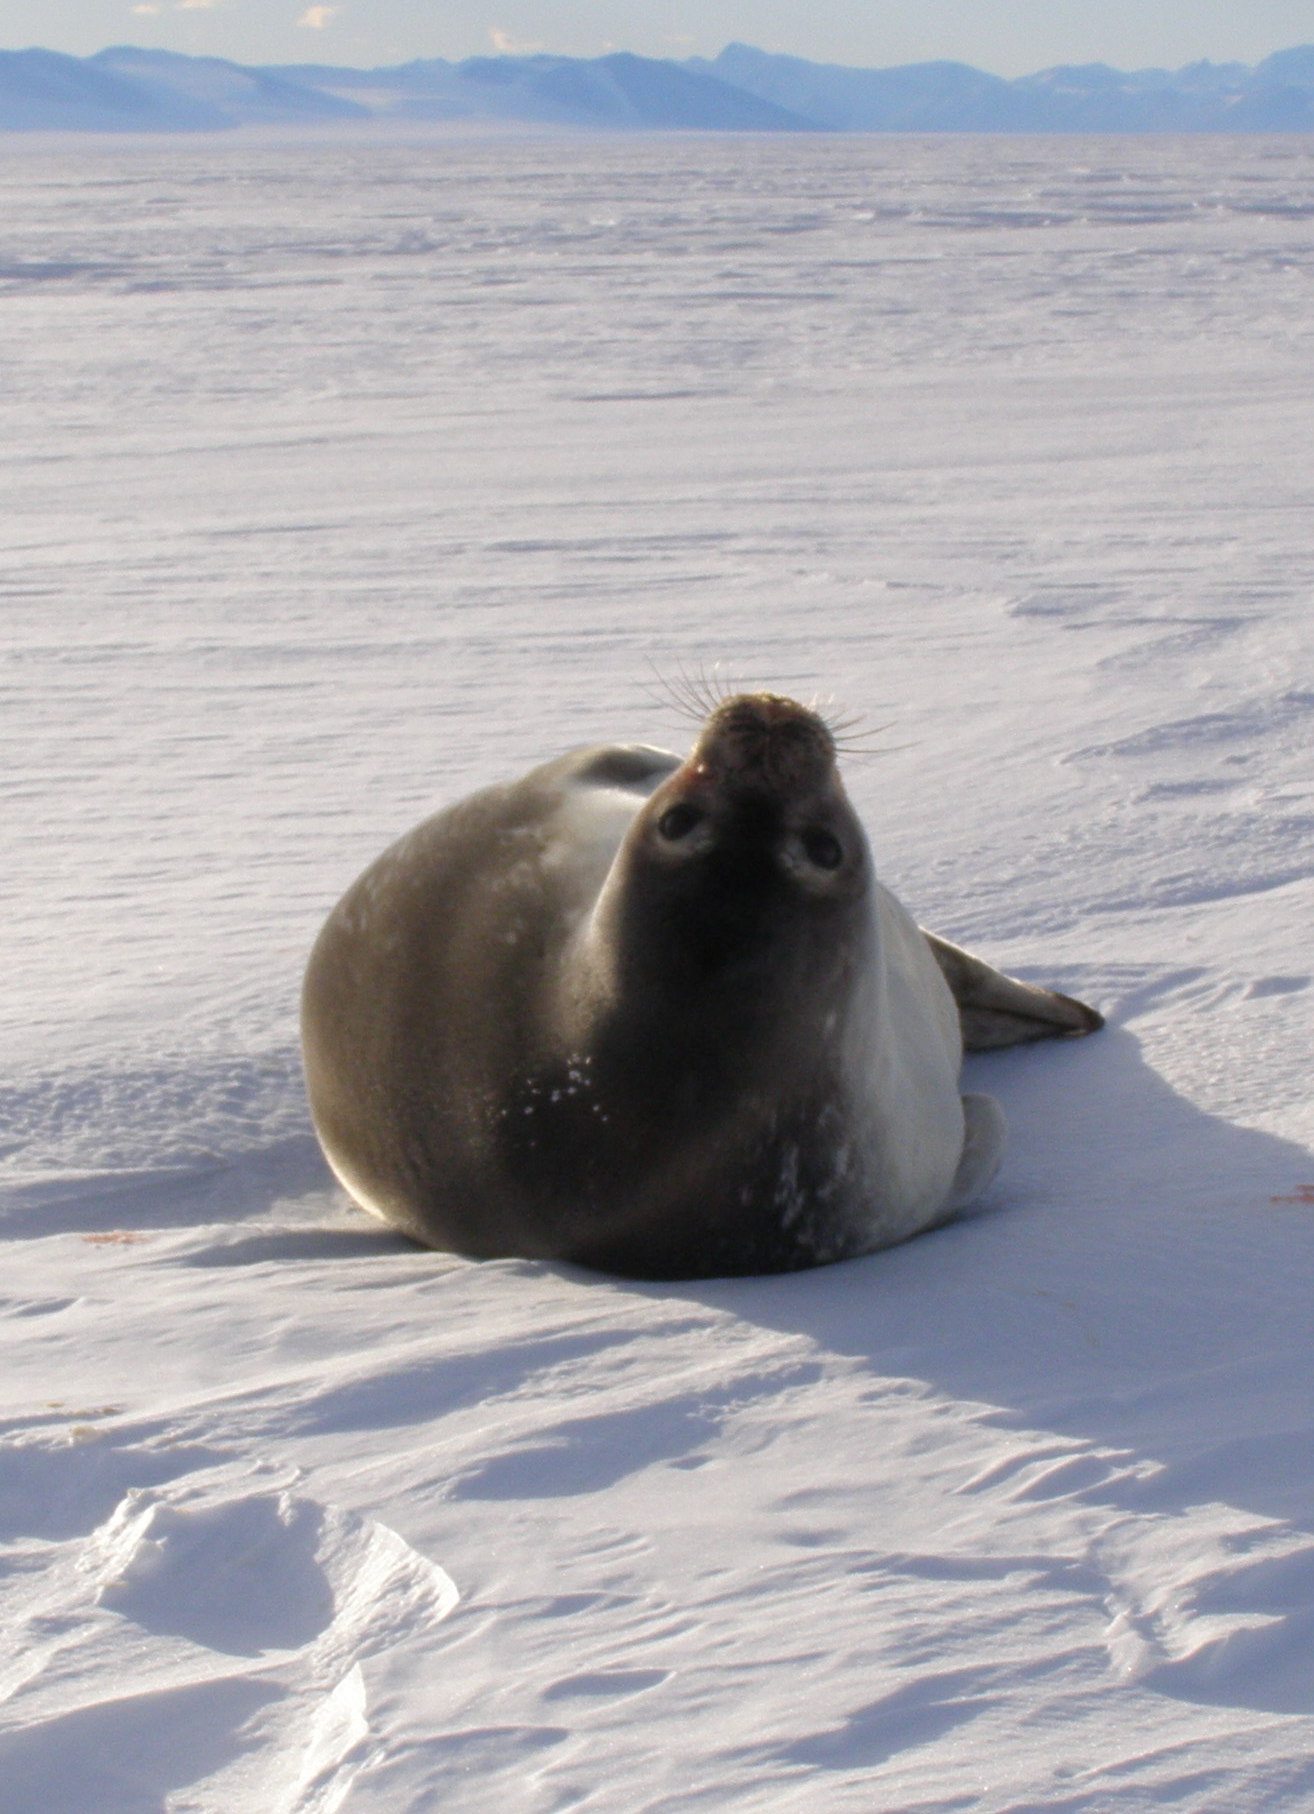 Weddell seals on the ice are a good indicator for nearby ice cracks